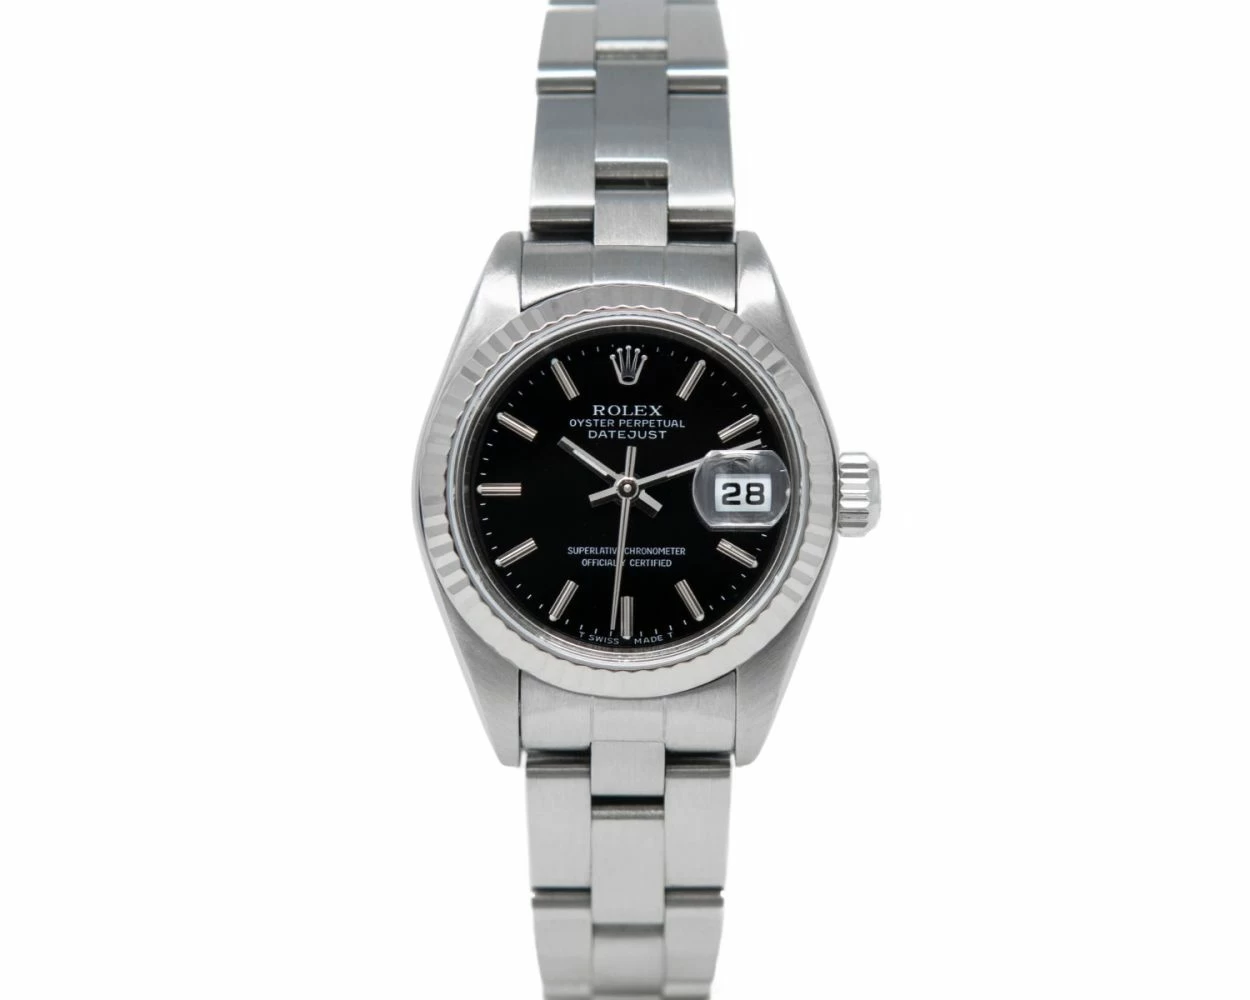 Rolex Lady-Datejust, Black Dial, Steel & White Gold, 69174